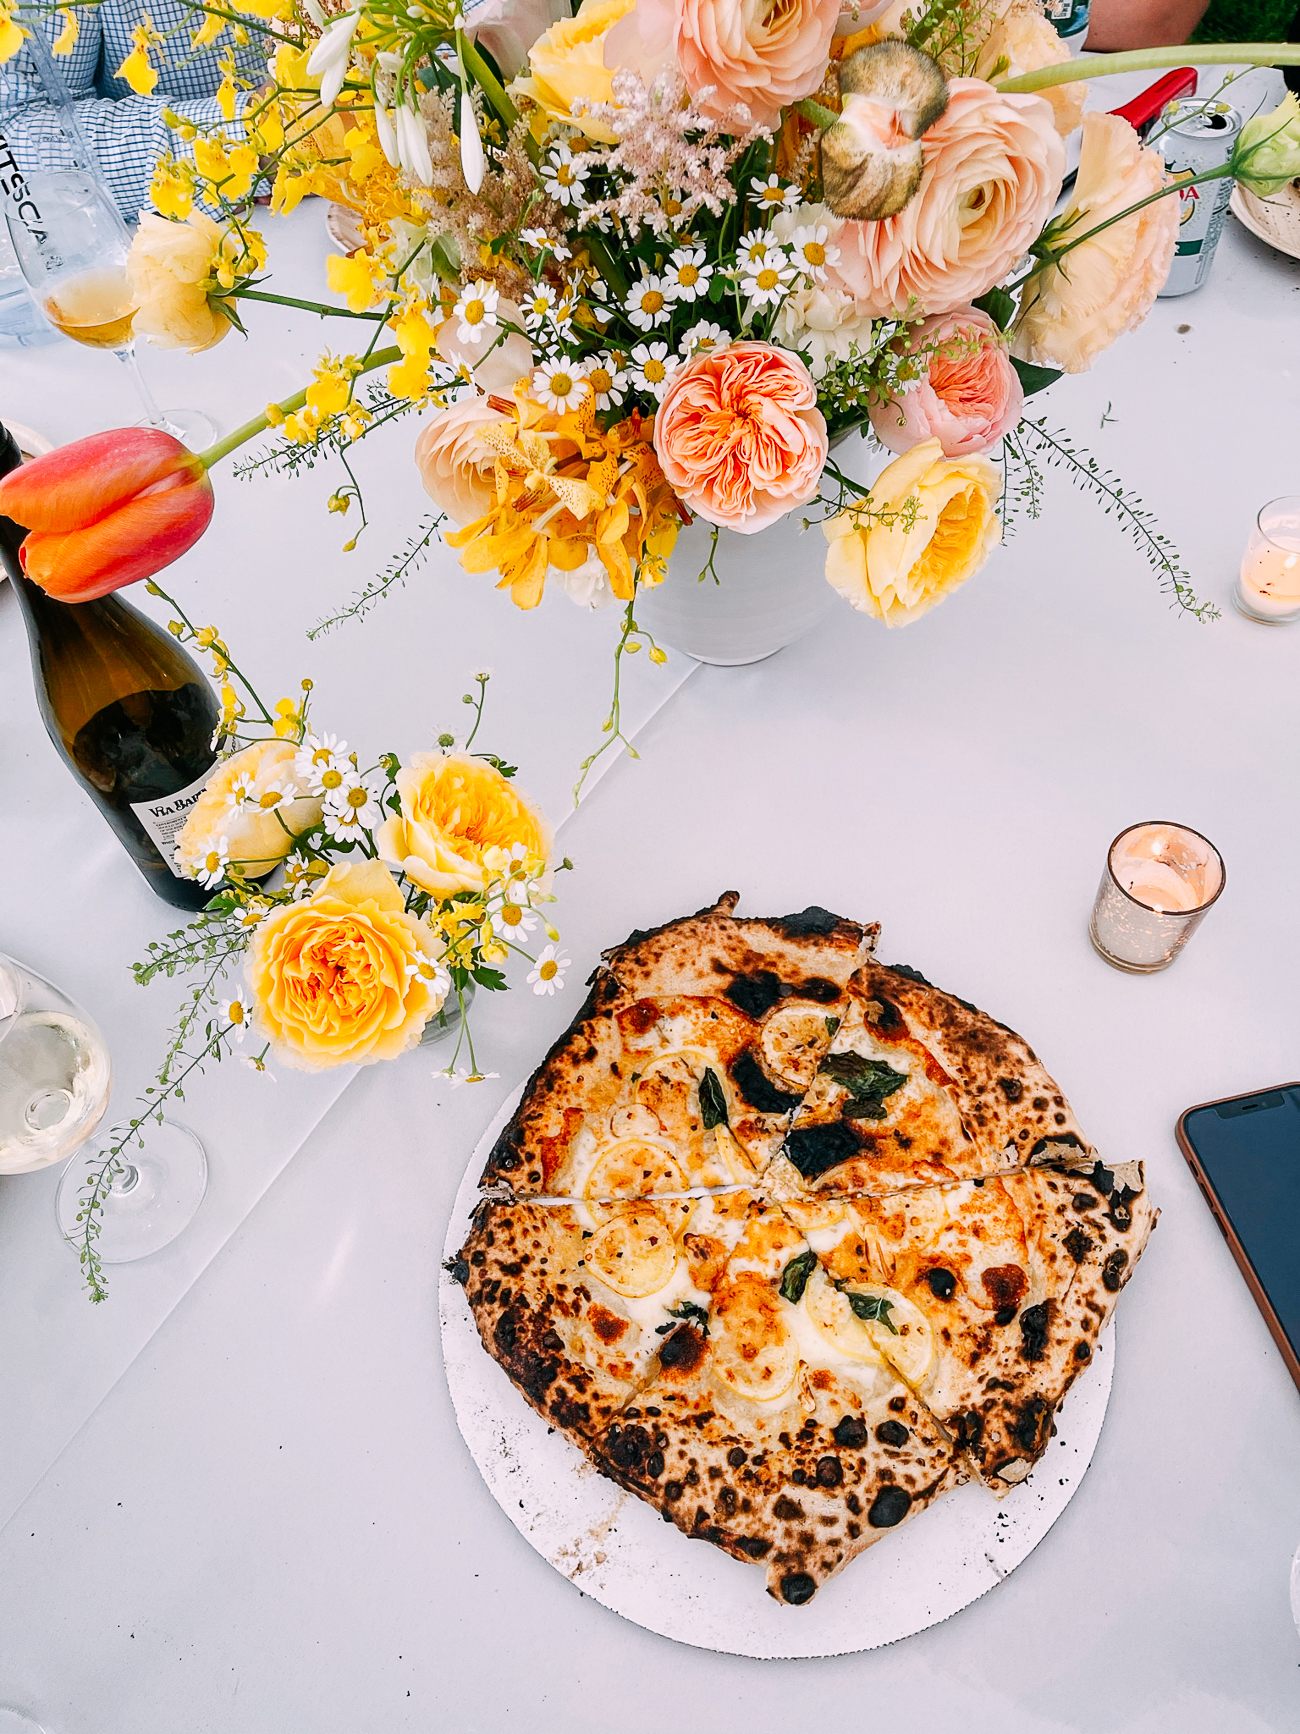 Pizza and flowers